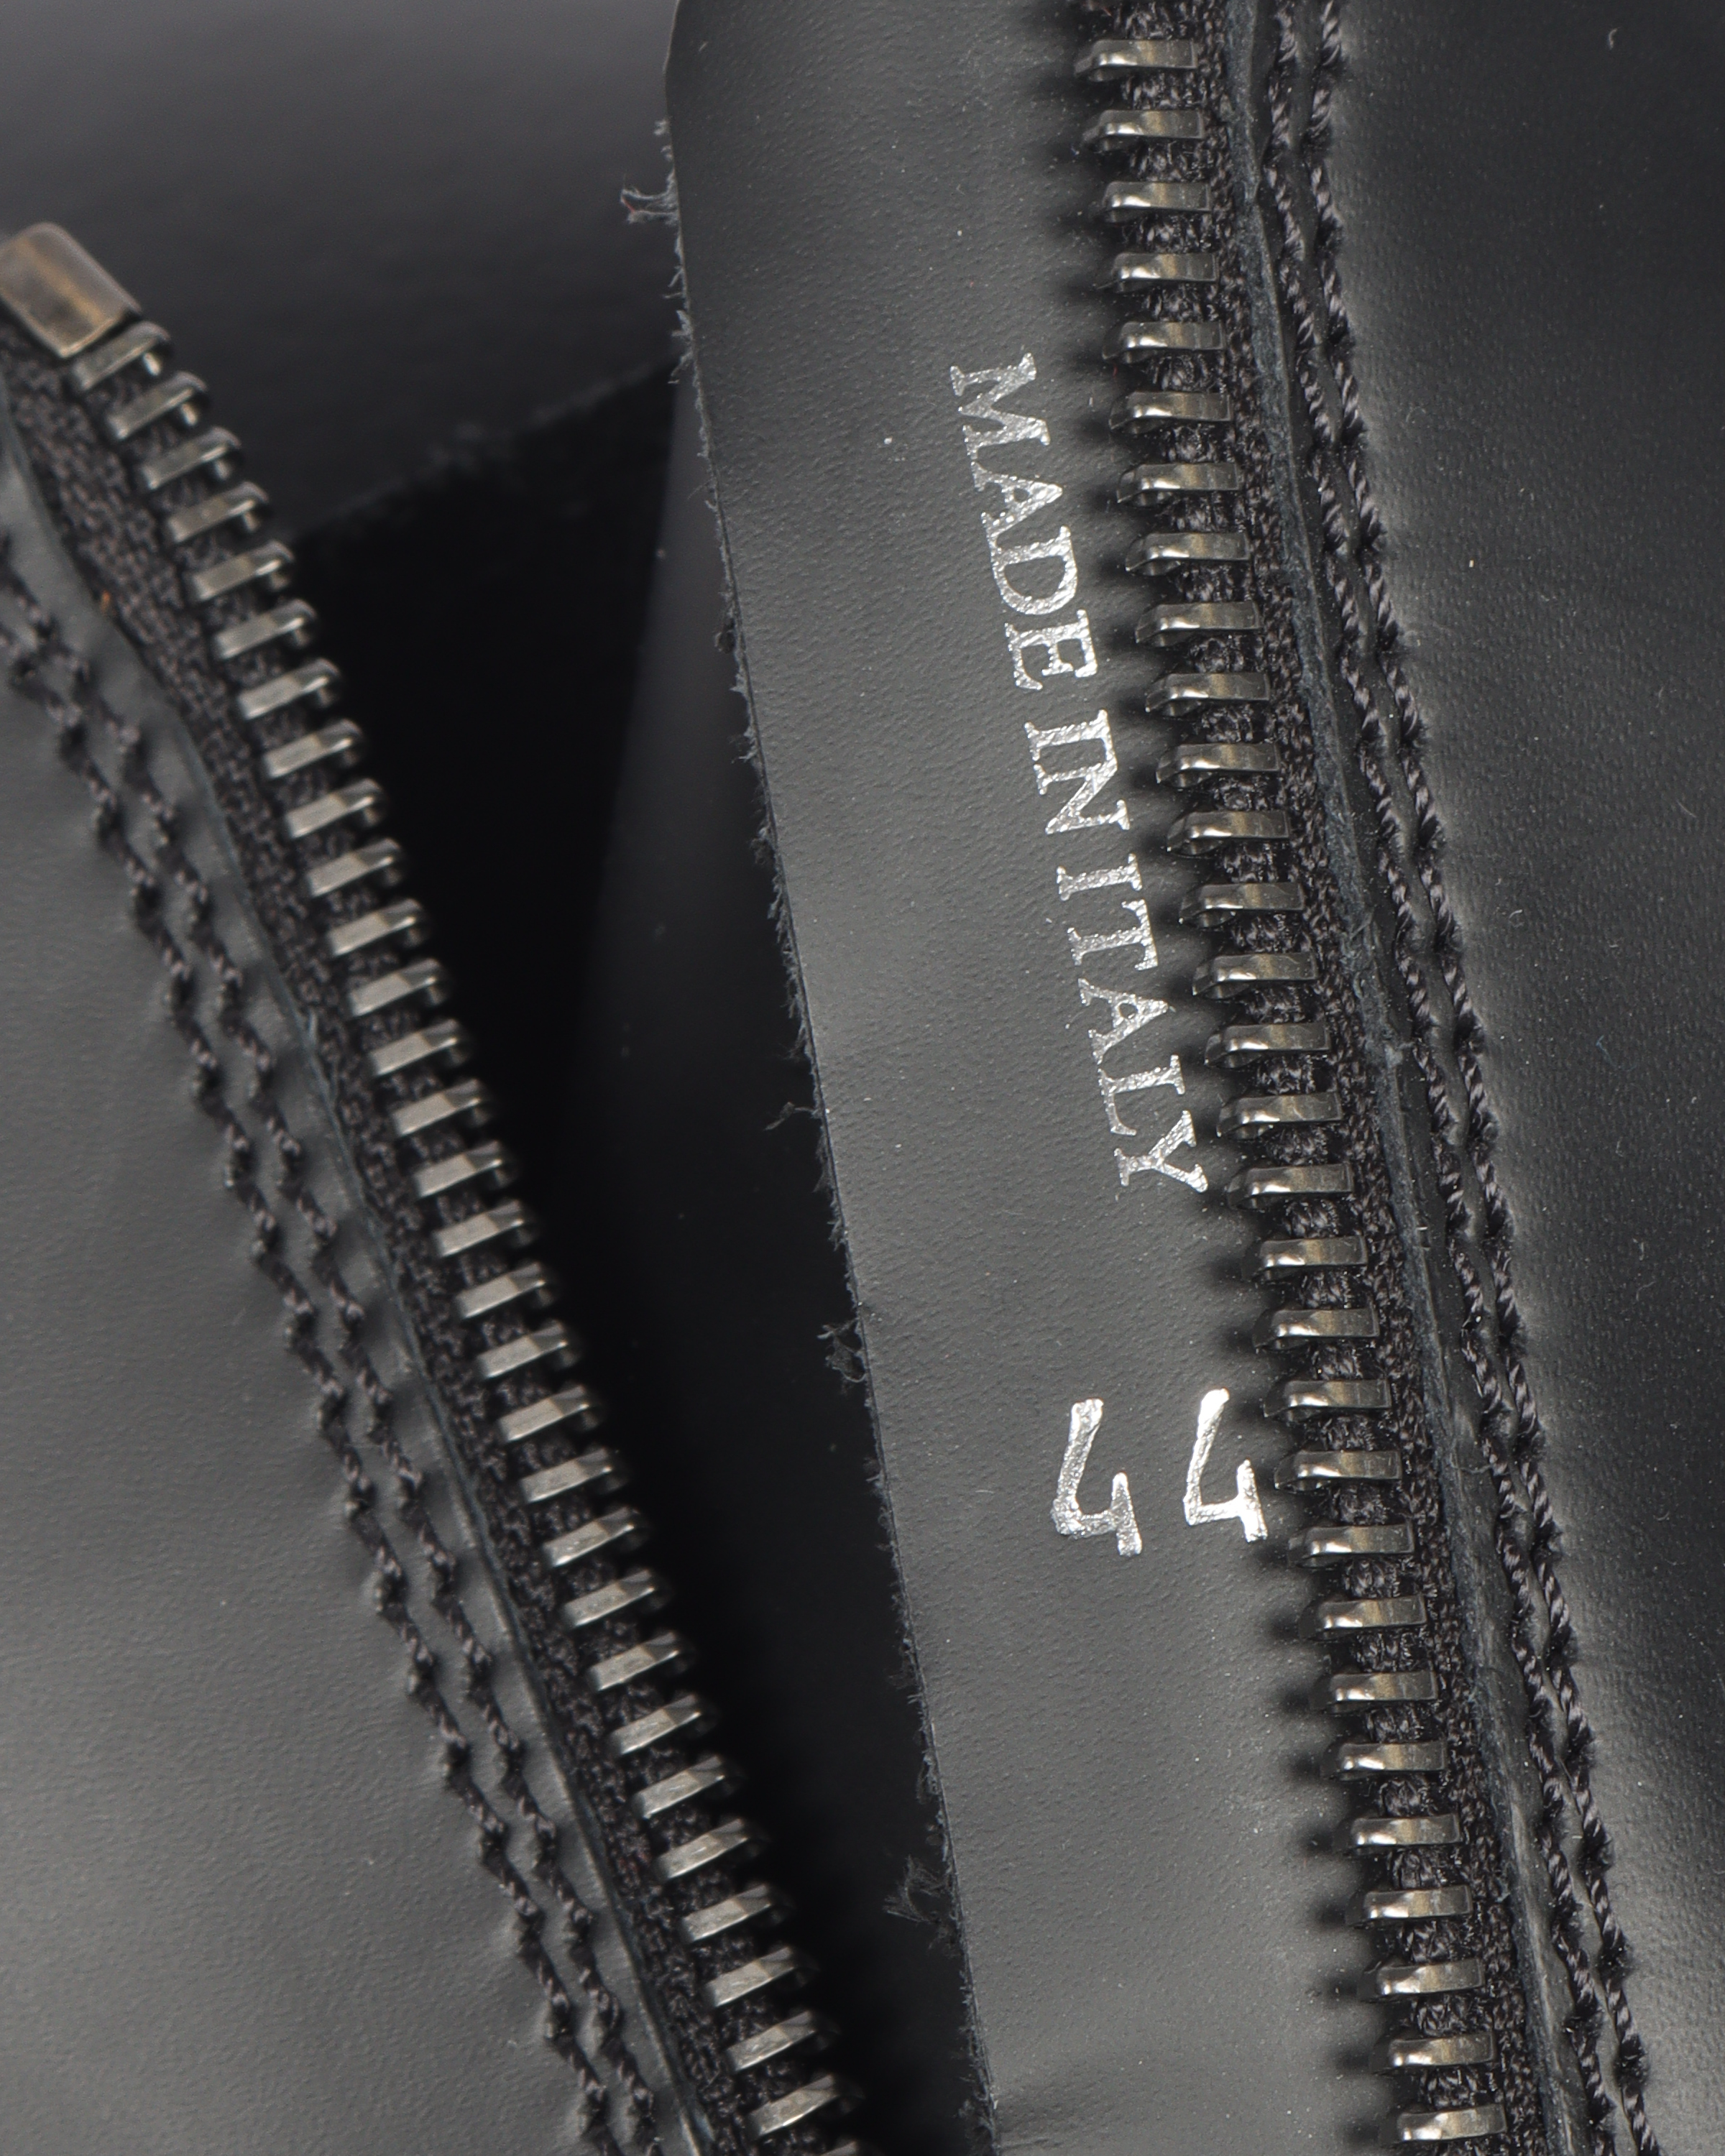 SS20 Leather Combat Boots